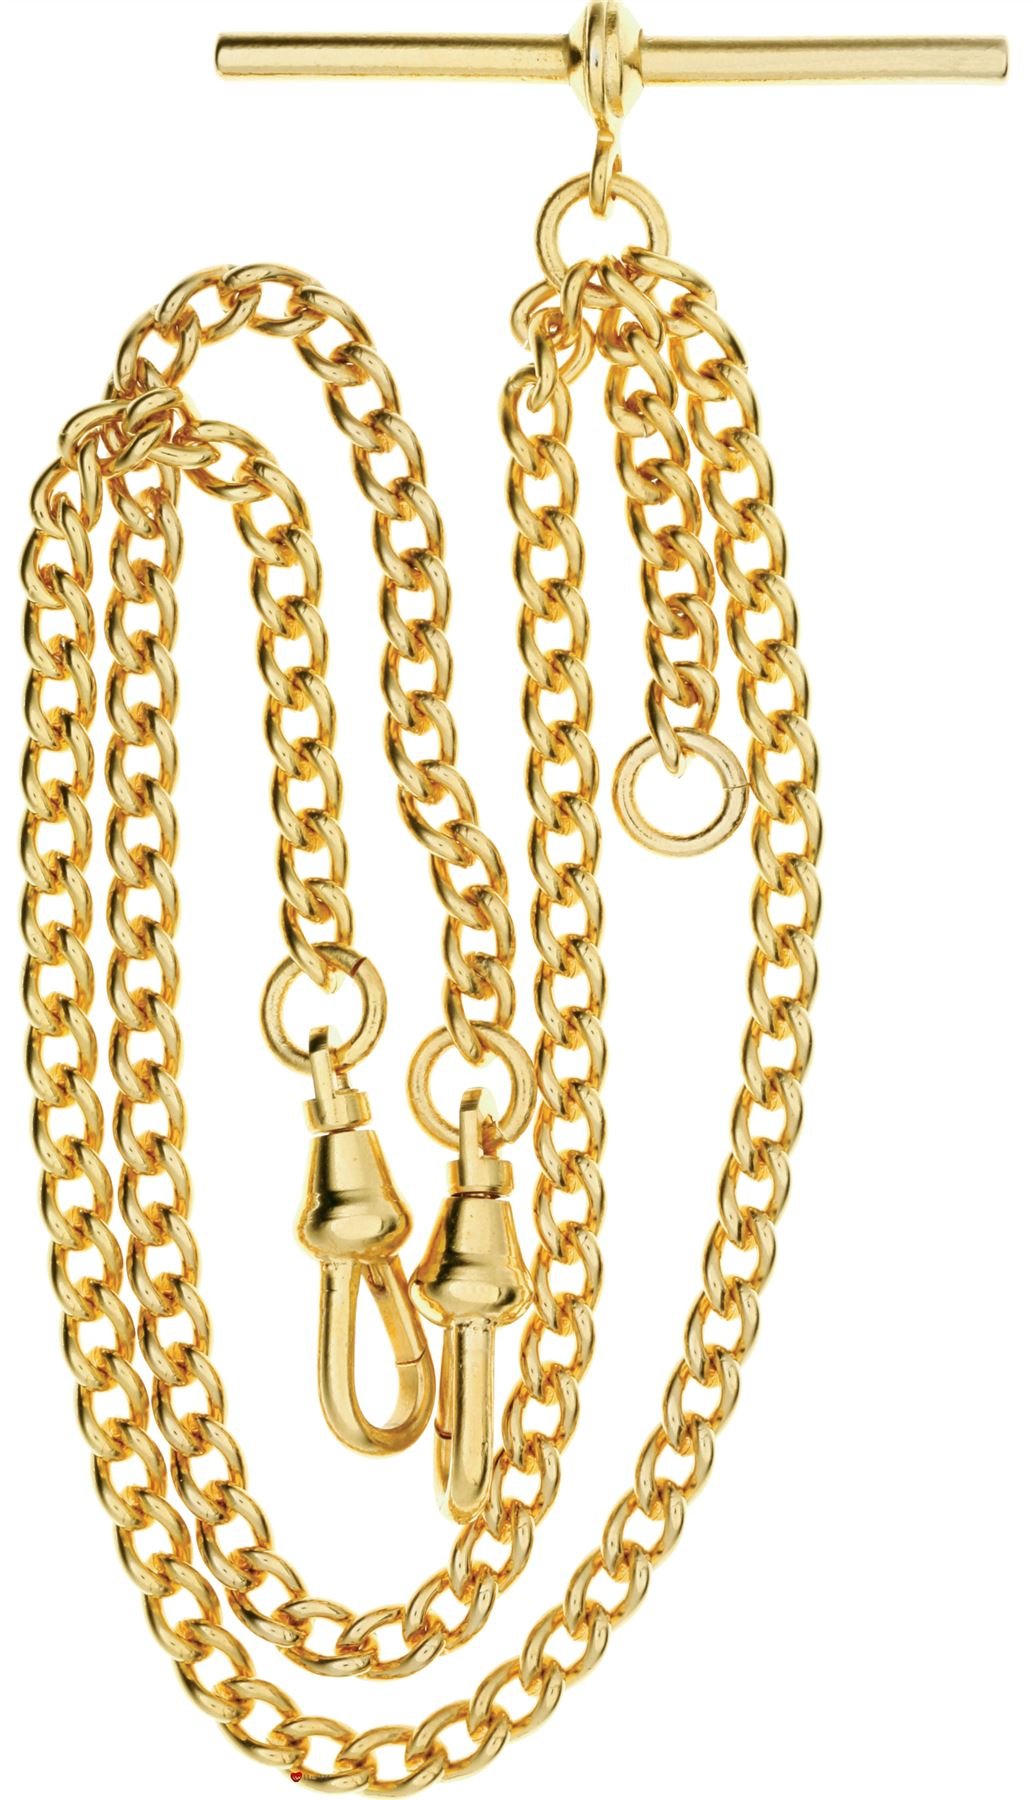 I LUV LTD Double Albert Chain for Pocket Watch - Finished in Rolled Gold - Gift Gents